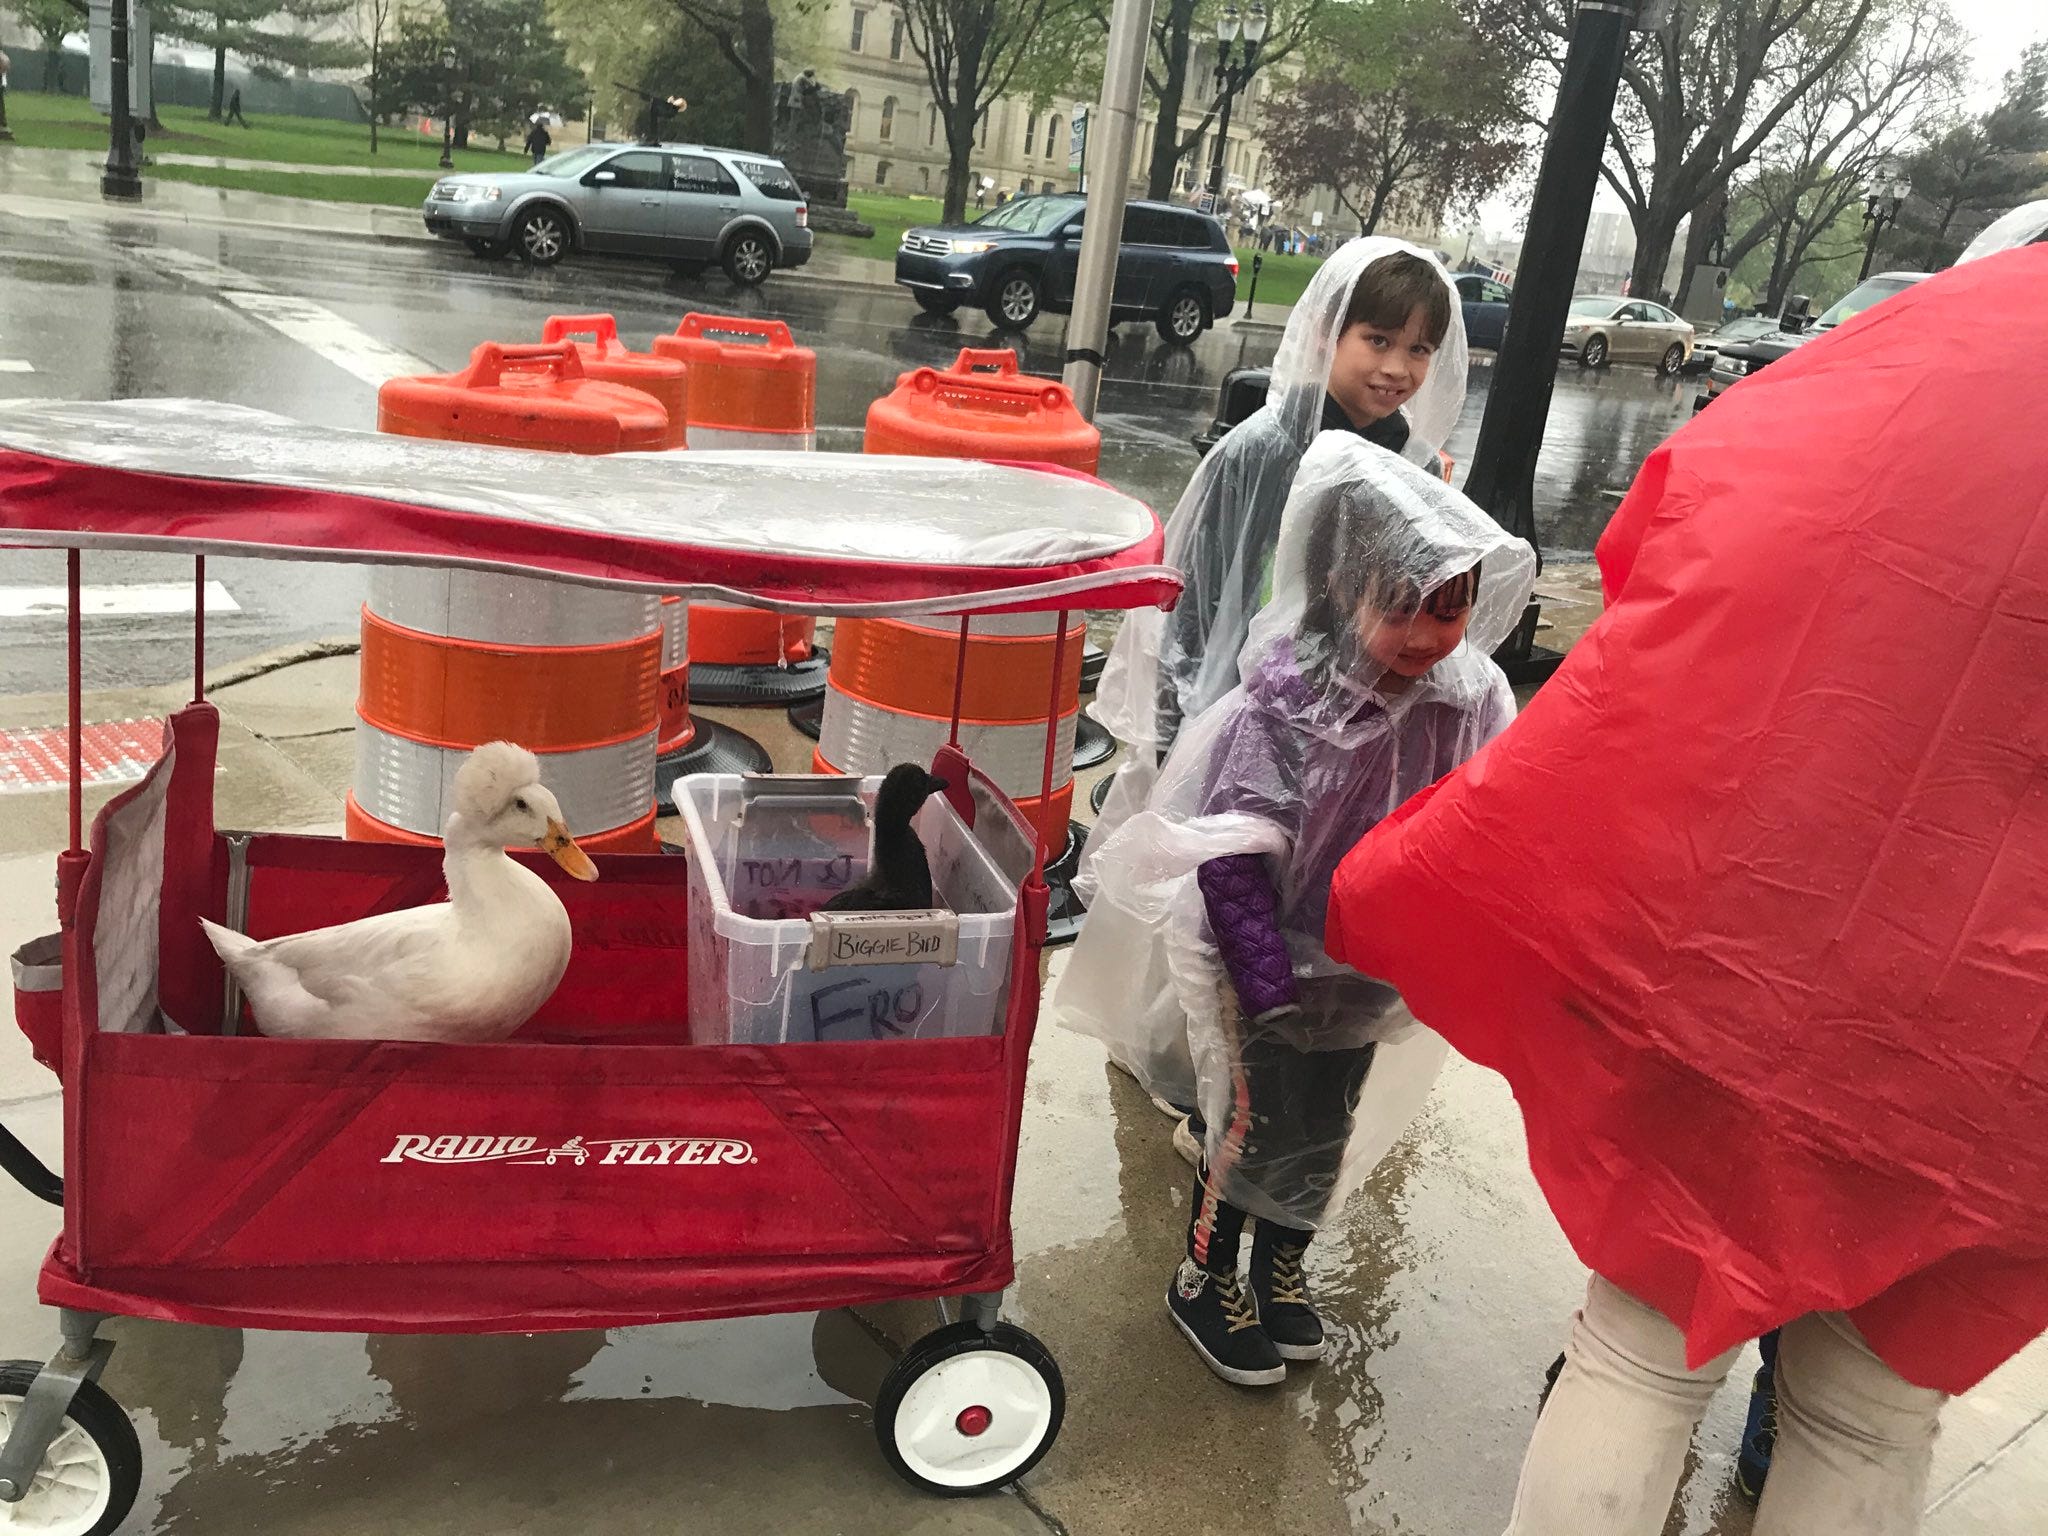 Rob Saari who came from Bridgman brought his children and his service ducks out to the Capitol protest. They also carried a sign that said "Duck Whitmer."